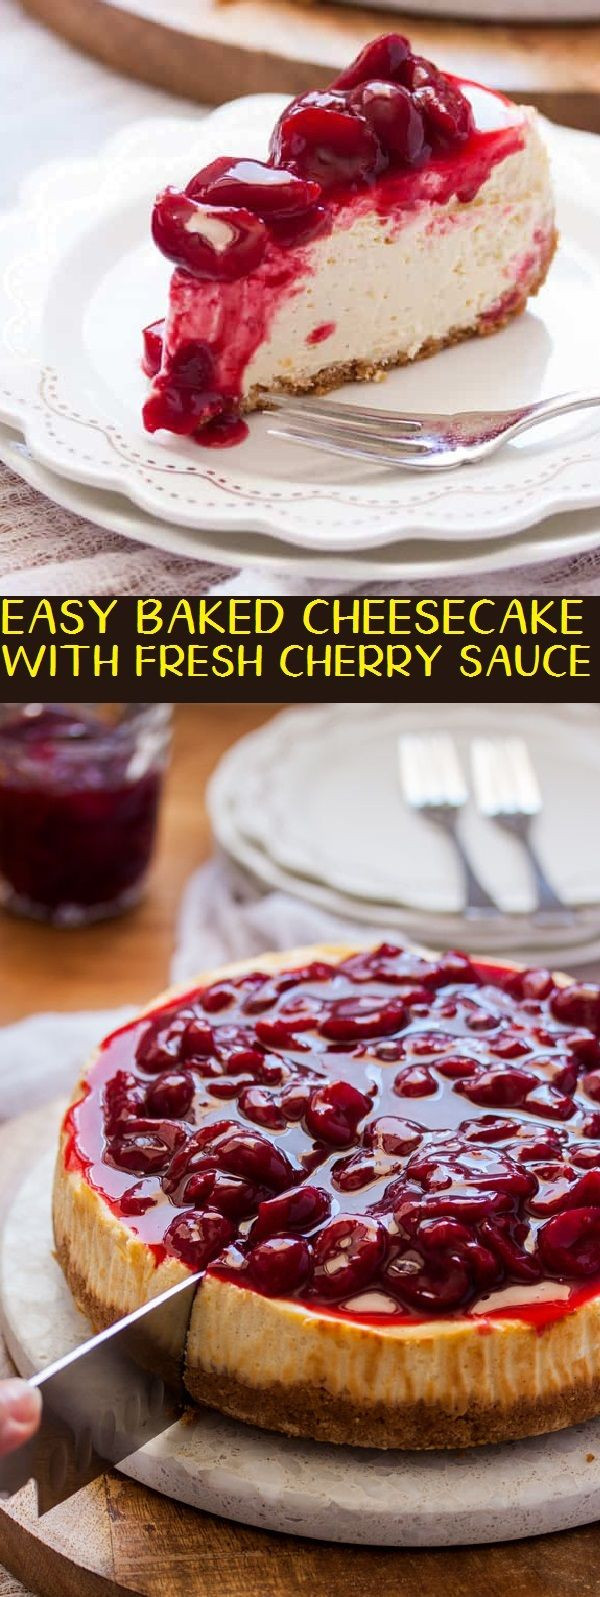 Cherry Sauce For Cheese Cake
 EASY BAKED CHEESECAKE WITH FRESH CHERRY SAUCE in 2020